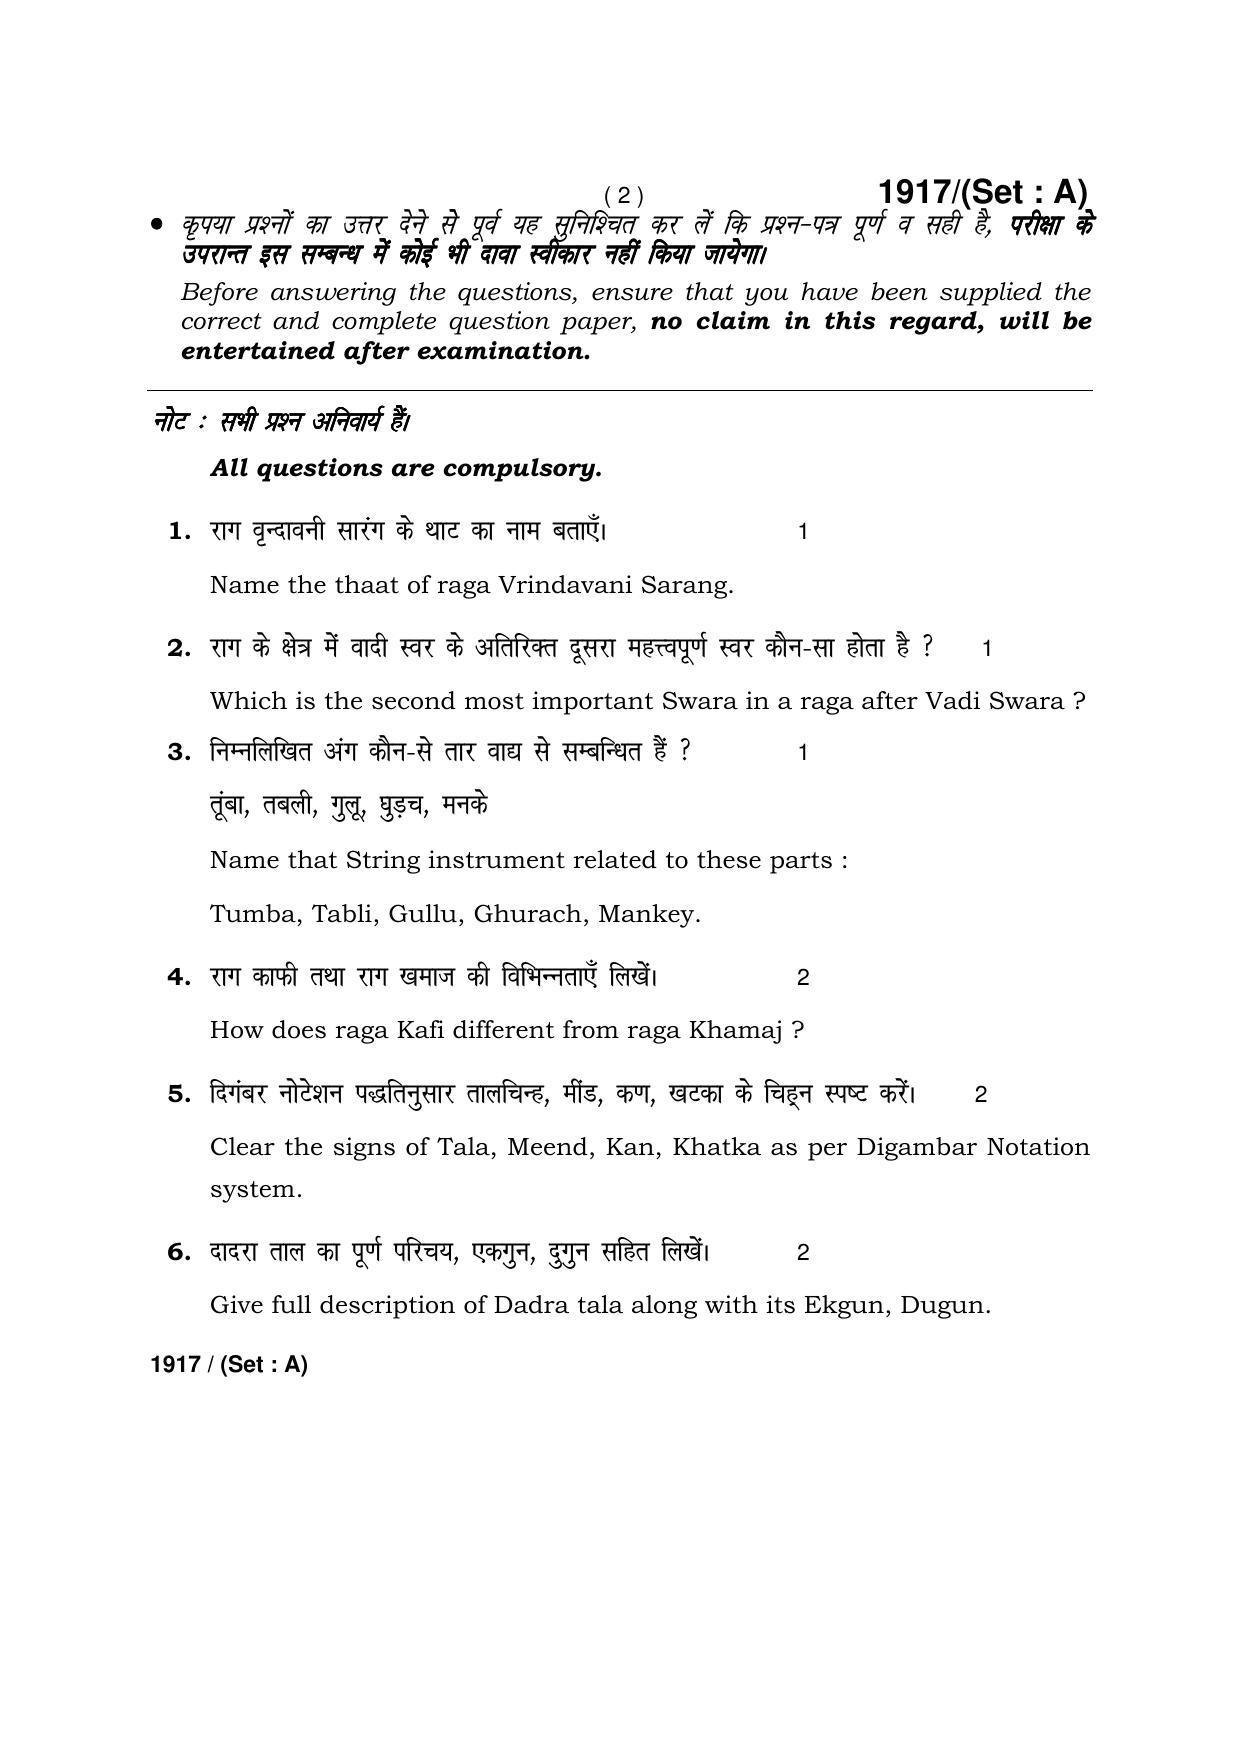 Haryana Board HBSE Class 10 Music Hindustani(Vocal) -B 2017 Question Paper - Page 2